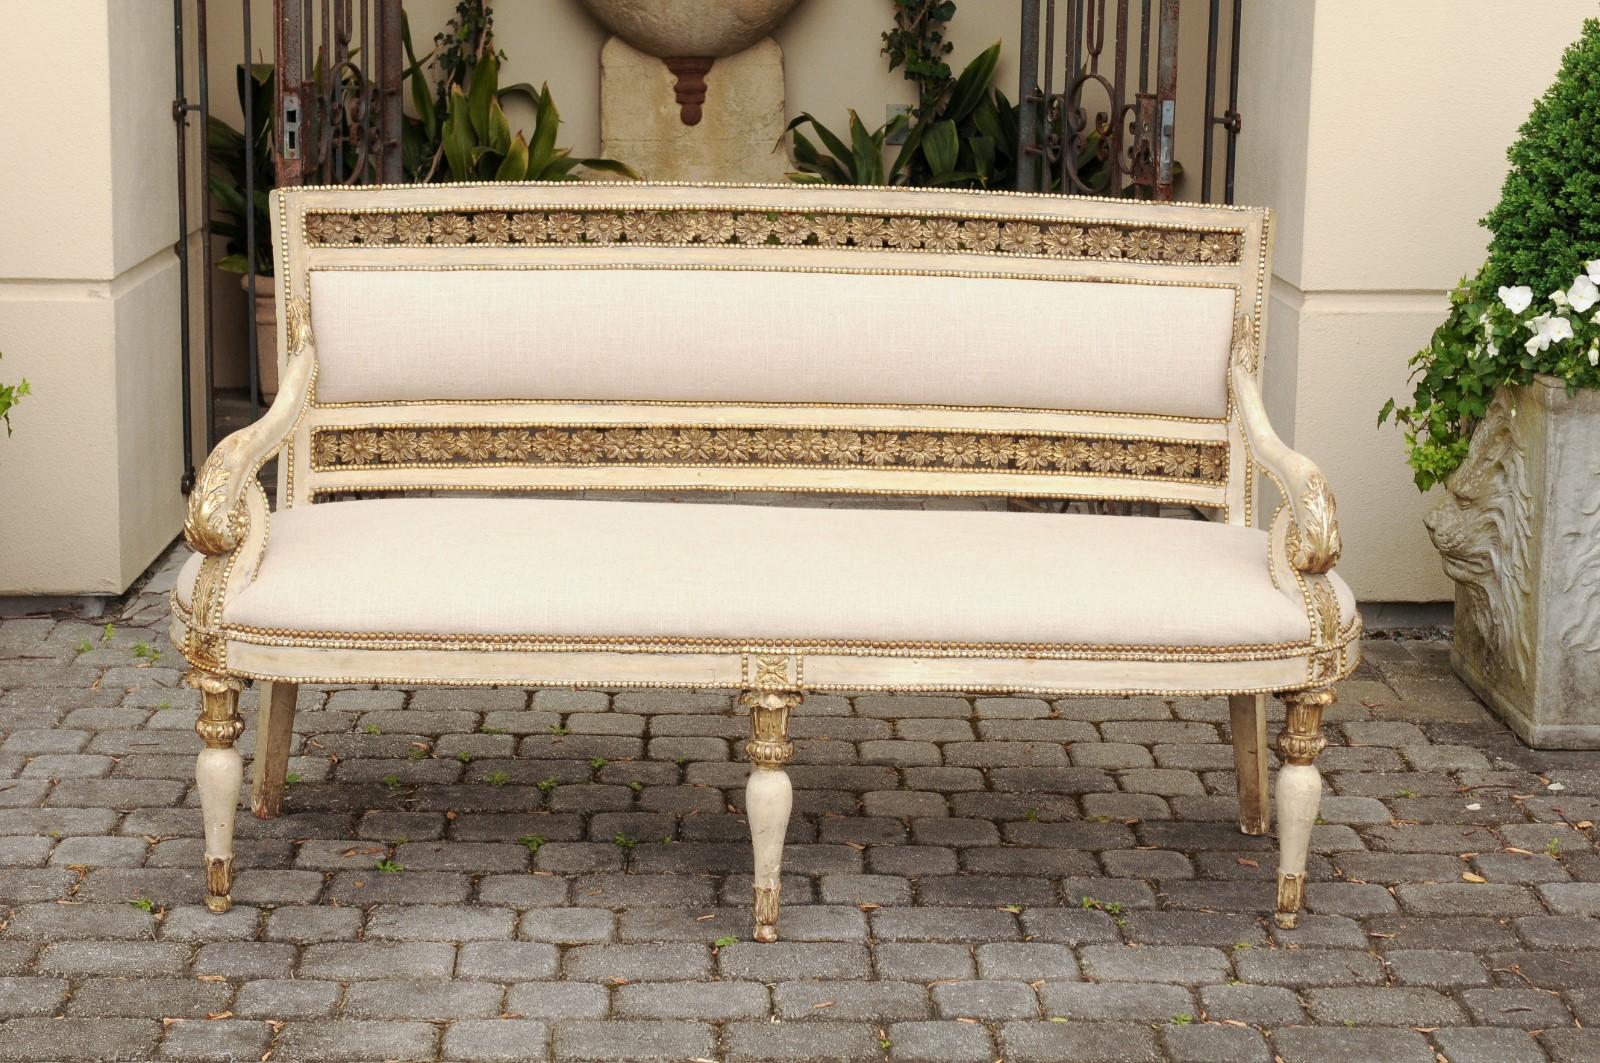 An Italian neoclassical period wooden settee from the early 19th century, with original paint, gilded accents, floral motifs and new upholstery. Born in Italy during the early years of the 19th century, this exquisite neoclassical settee features a